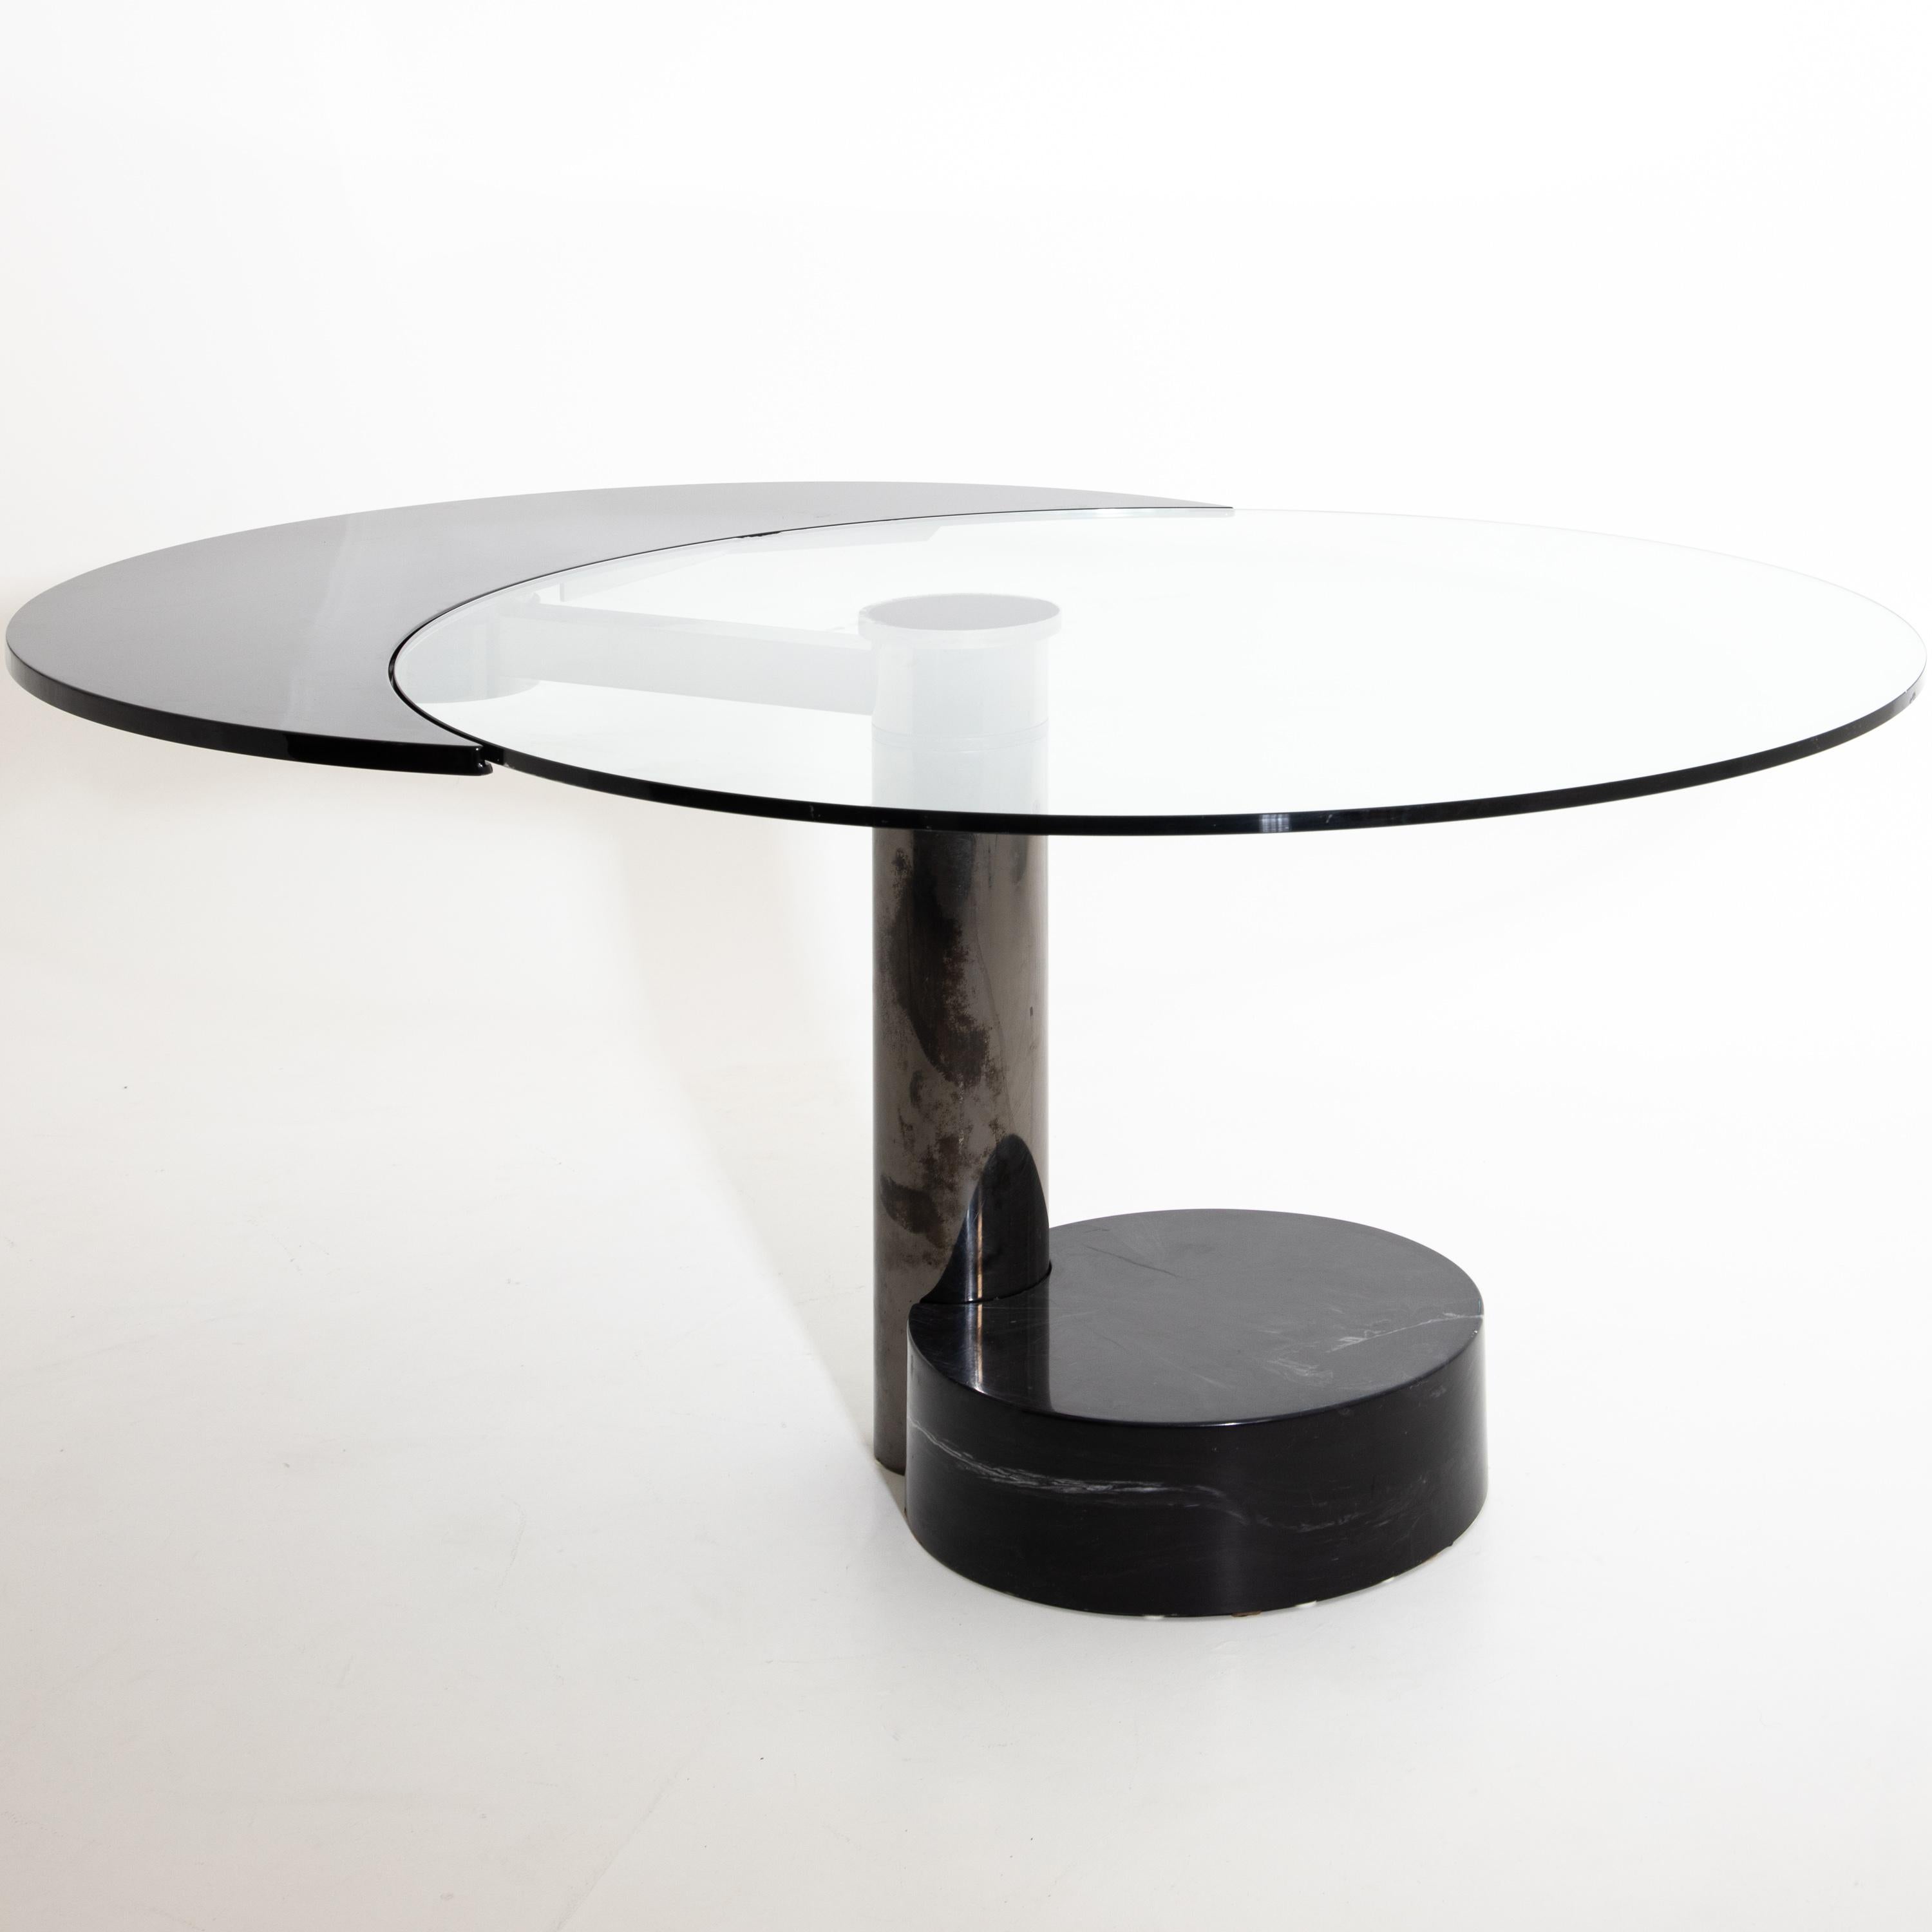 Round dining table by Pierre Cardin with revolving tabletop in black as an extendable element that changes the tabletop’s shape from round to oval. The table stands on a cylindrical stainless-steel base with a black round artificial stone base.
 